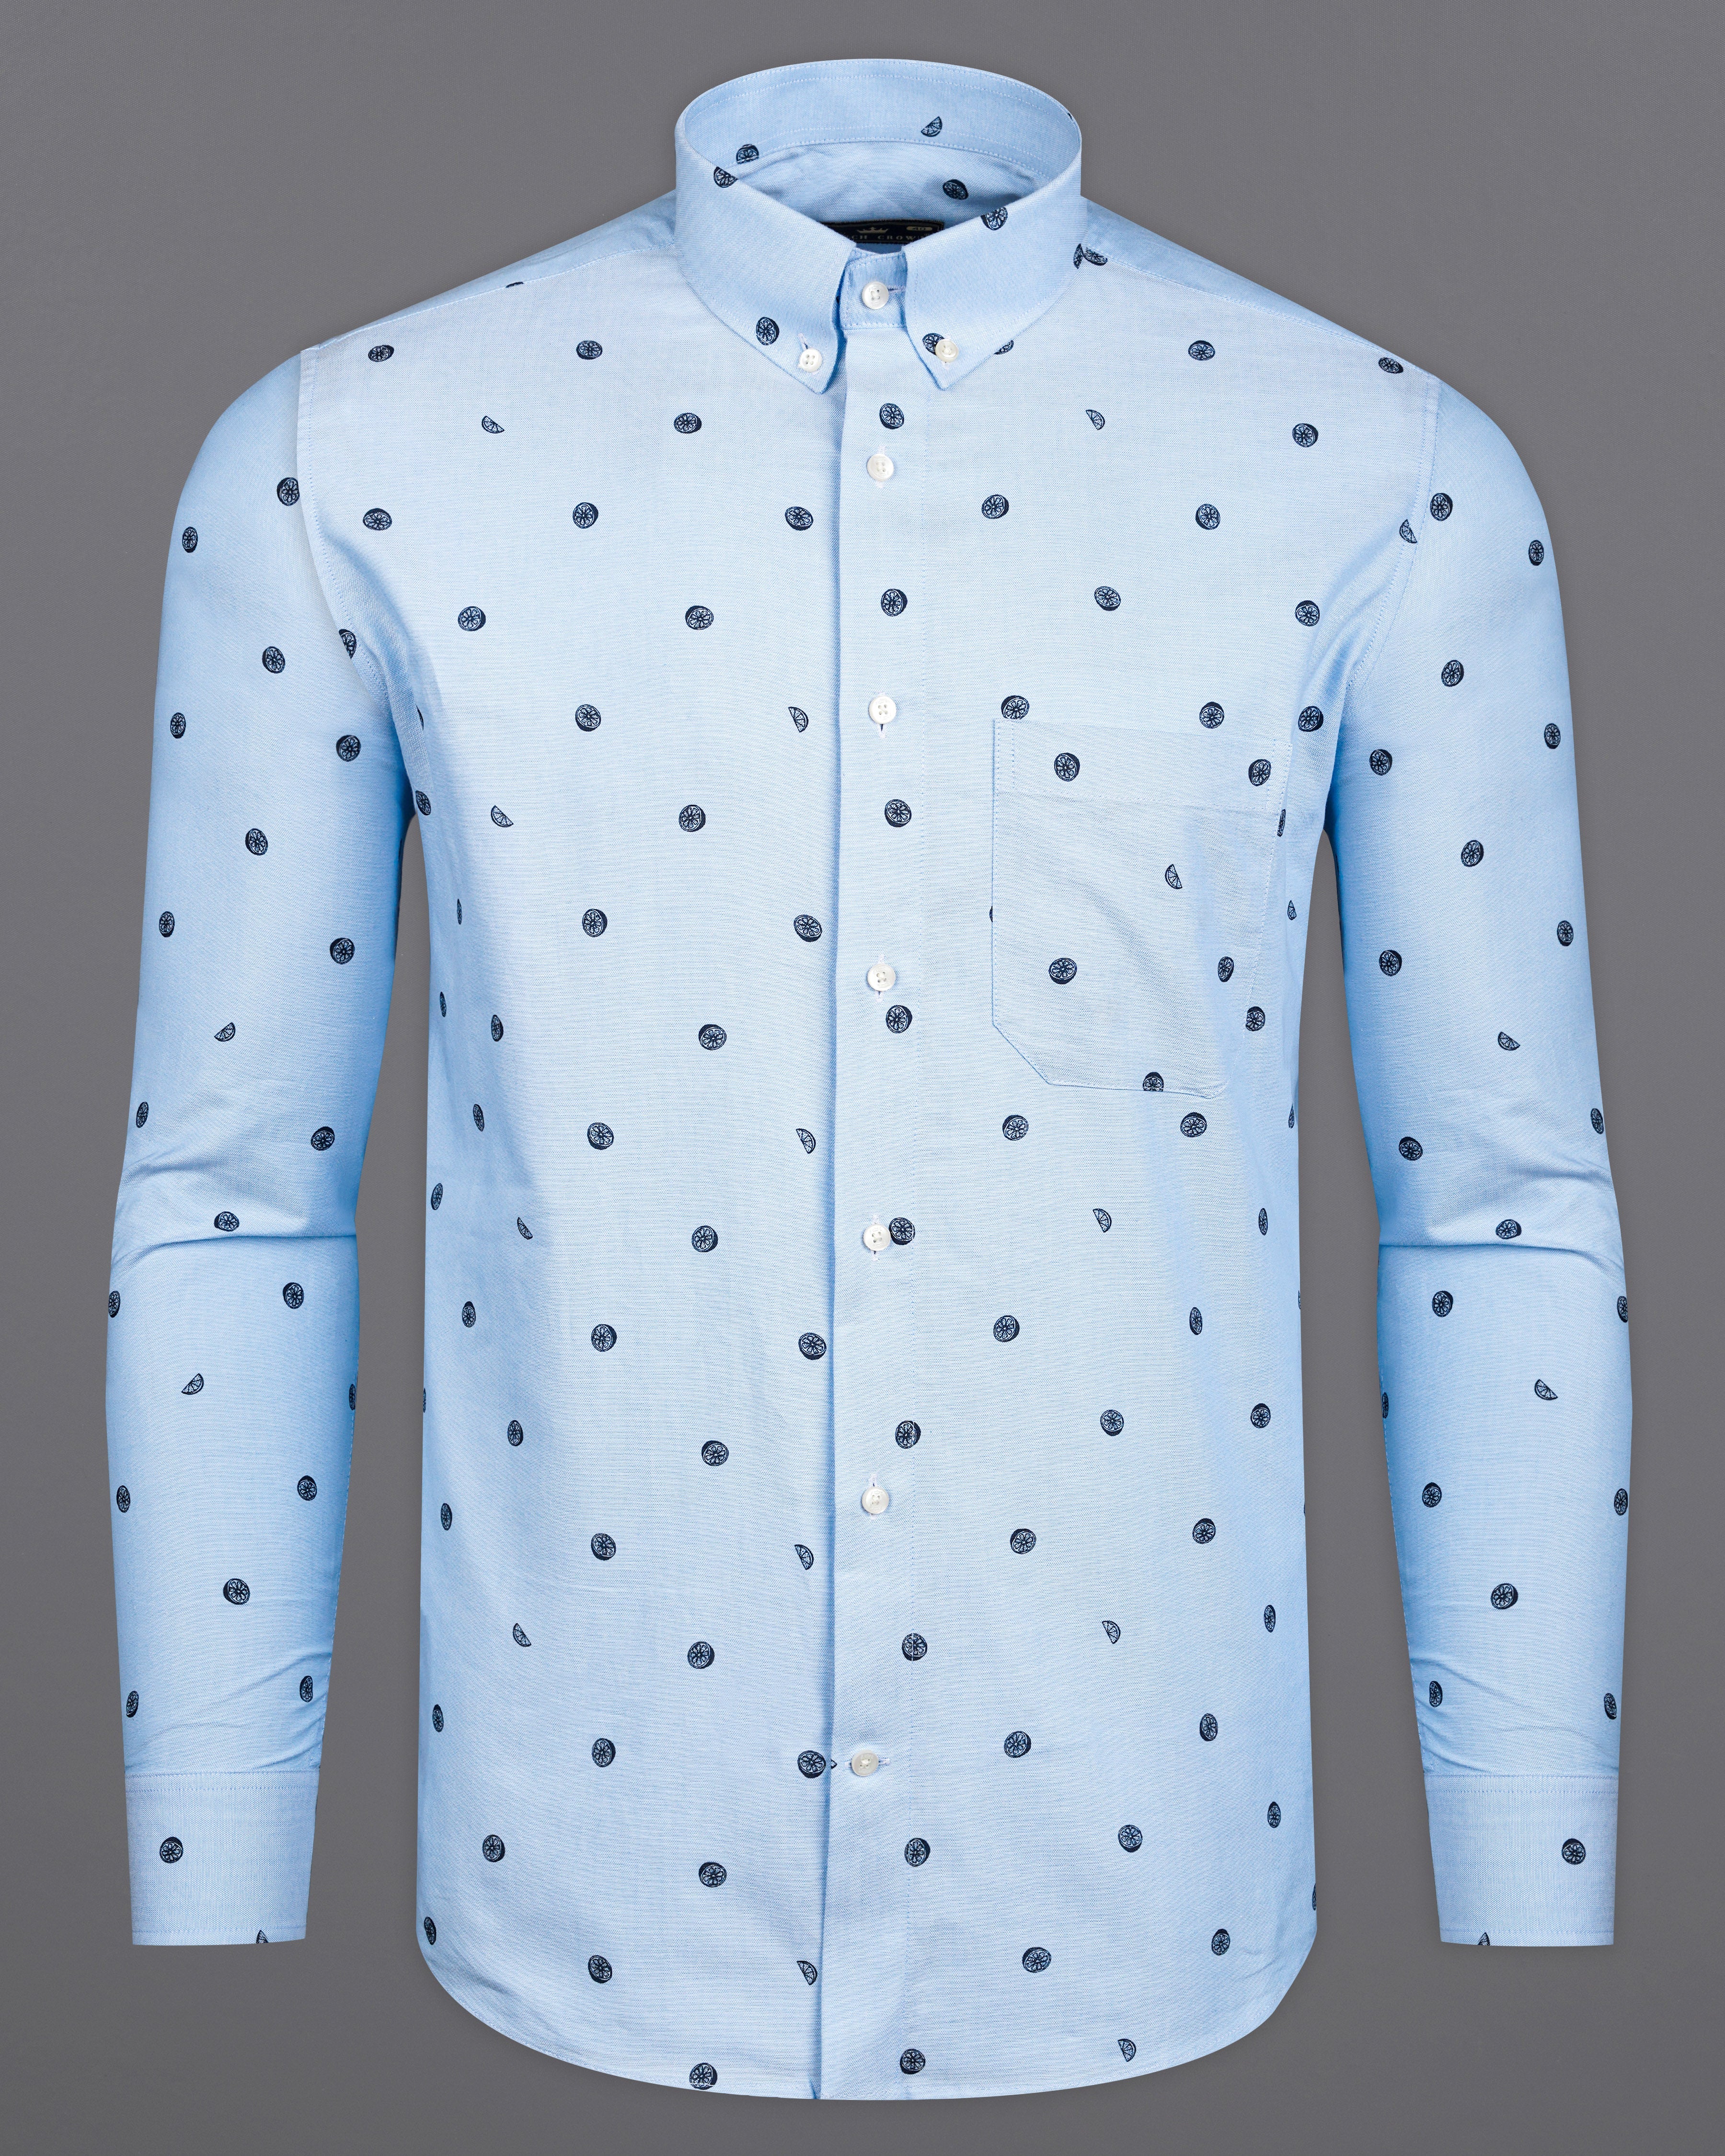 Spindle Sky Blue with Gunmetal Blue Printed Royal Oxford Shirt 9849-BD-38, 9849-BD-H-38, 9849-BD-39, 9849-BD-H-39, 9849-BD-40, 9849-BD-H-40, 9849-BD-42, 9849-BD-H-42, 9849-BD-44, 9849-BD-H-44, 9849-BD-46, 9849-BD-H-46, 9849-BD-48, 9849-BD-H-48, 9849-BD-50, 9849-BD-H-50, 9849-BD-52, 9849-BD-H-52